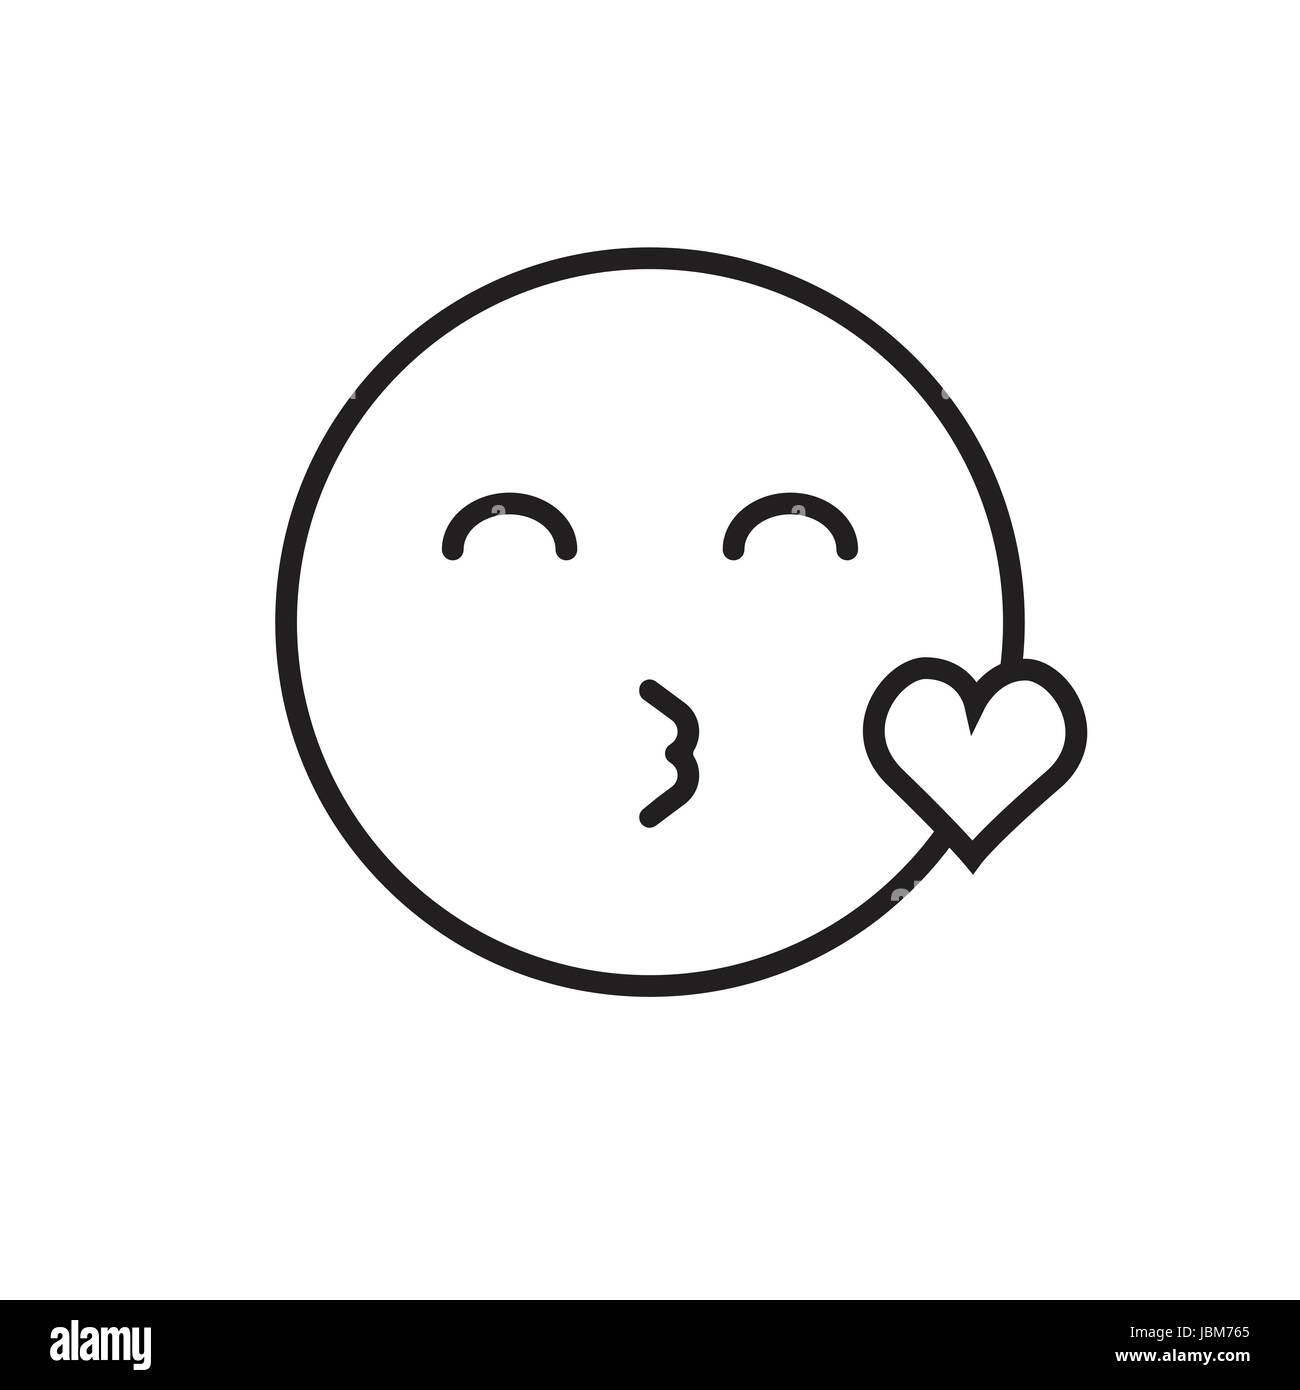 Smiling Cartoon Face Blowing Kiss Positive People Emotion Icon Stock